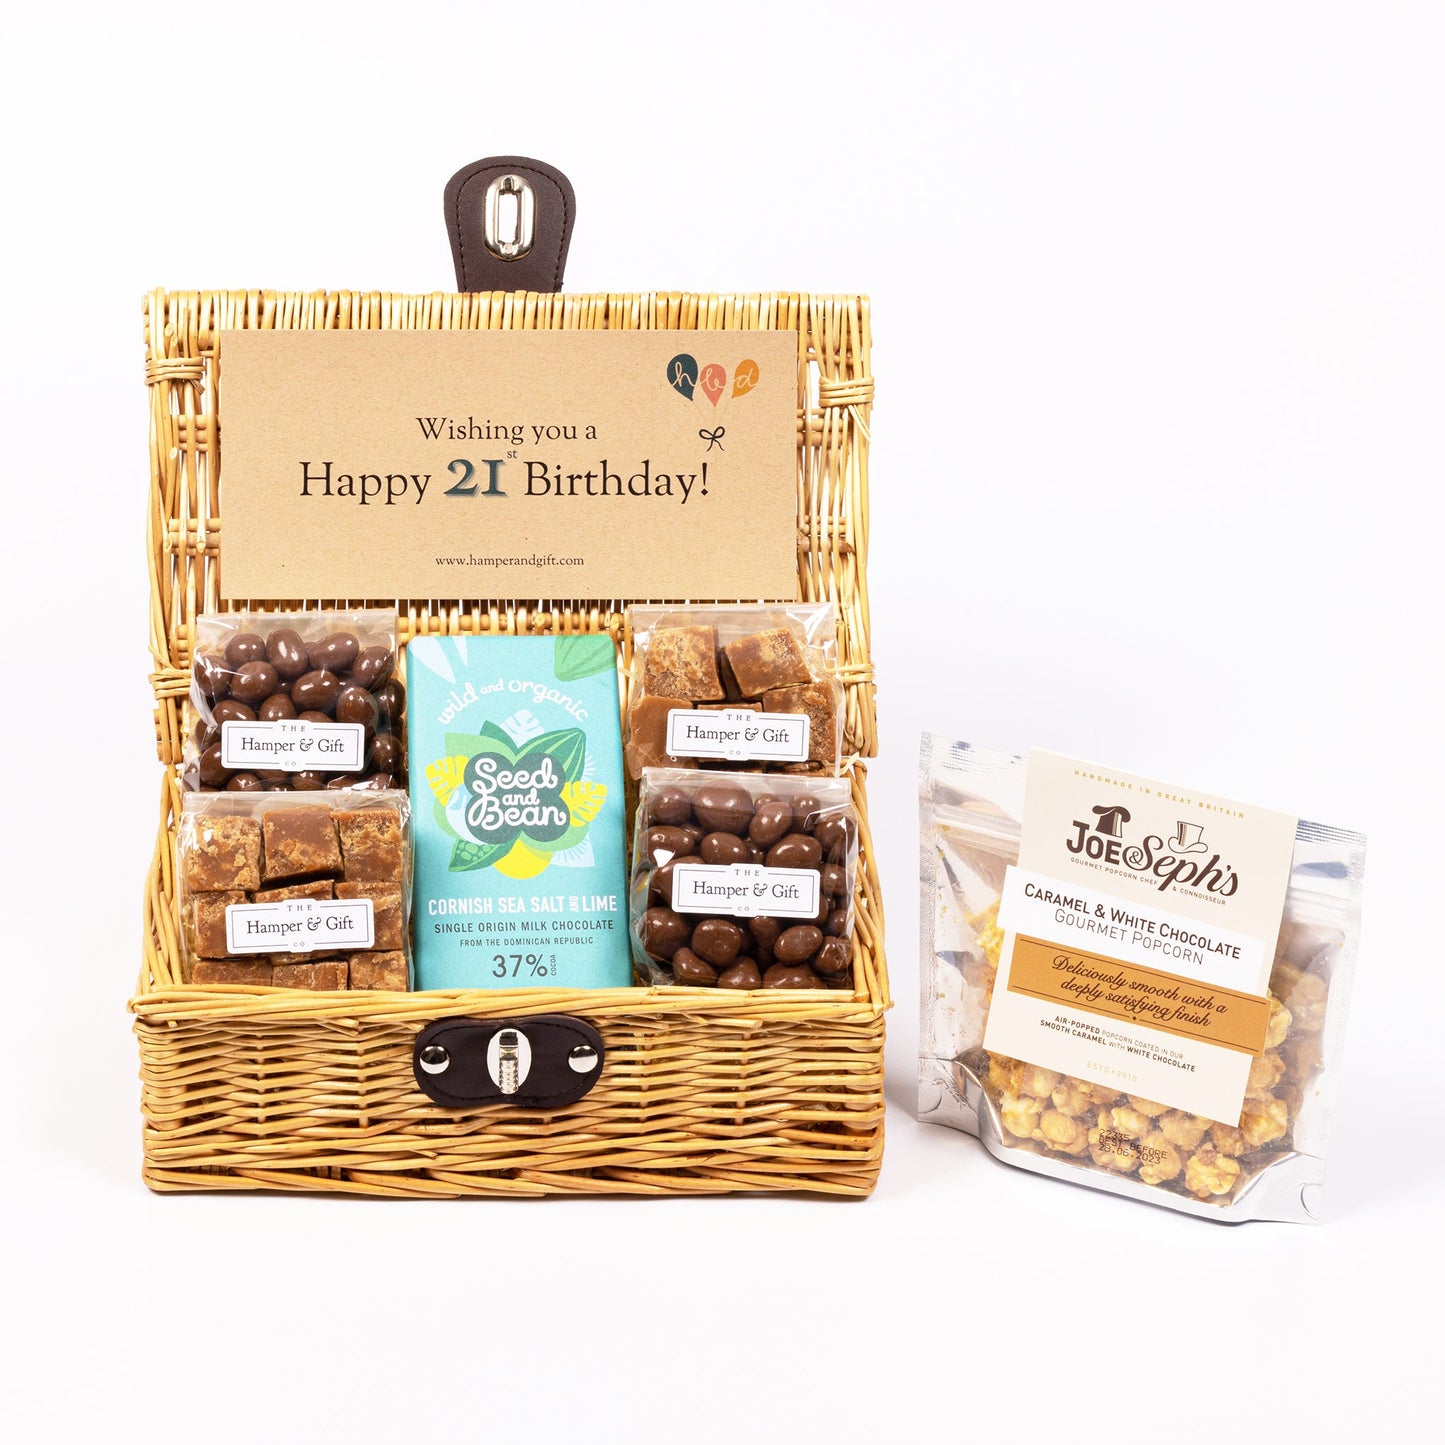 21st Birthday Hamper filled with chocolate, fudge and gourmet popcorn